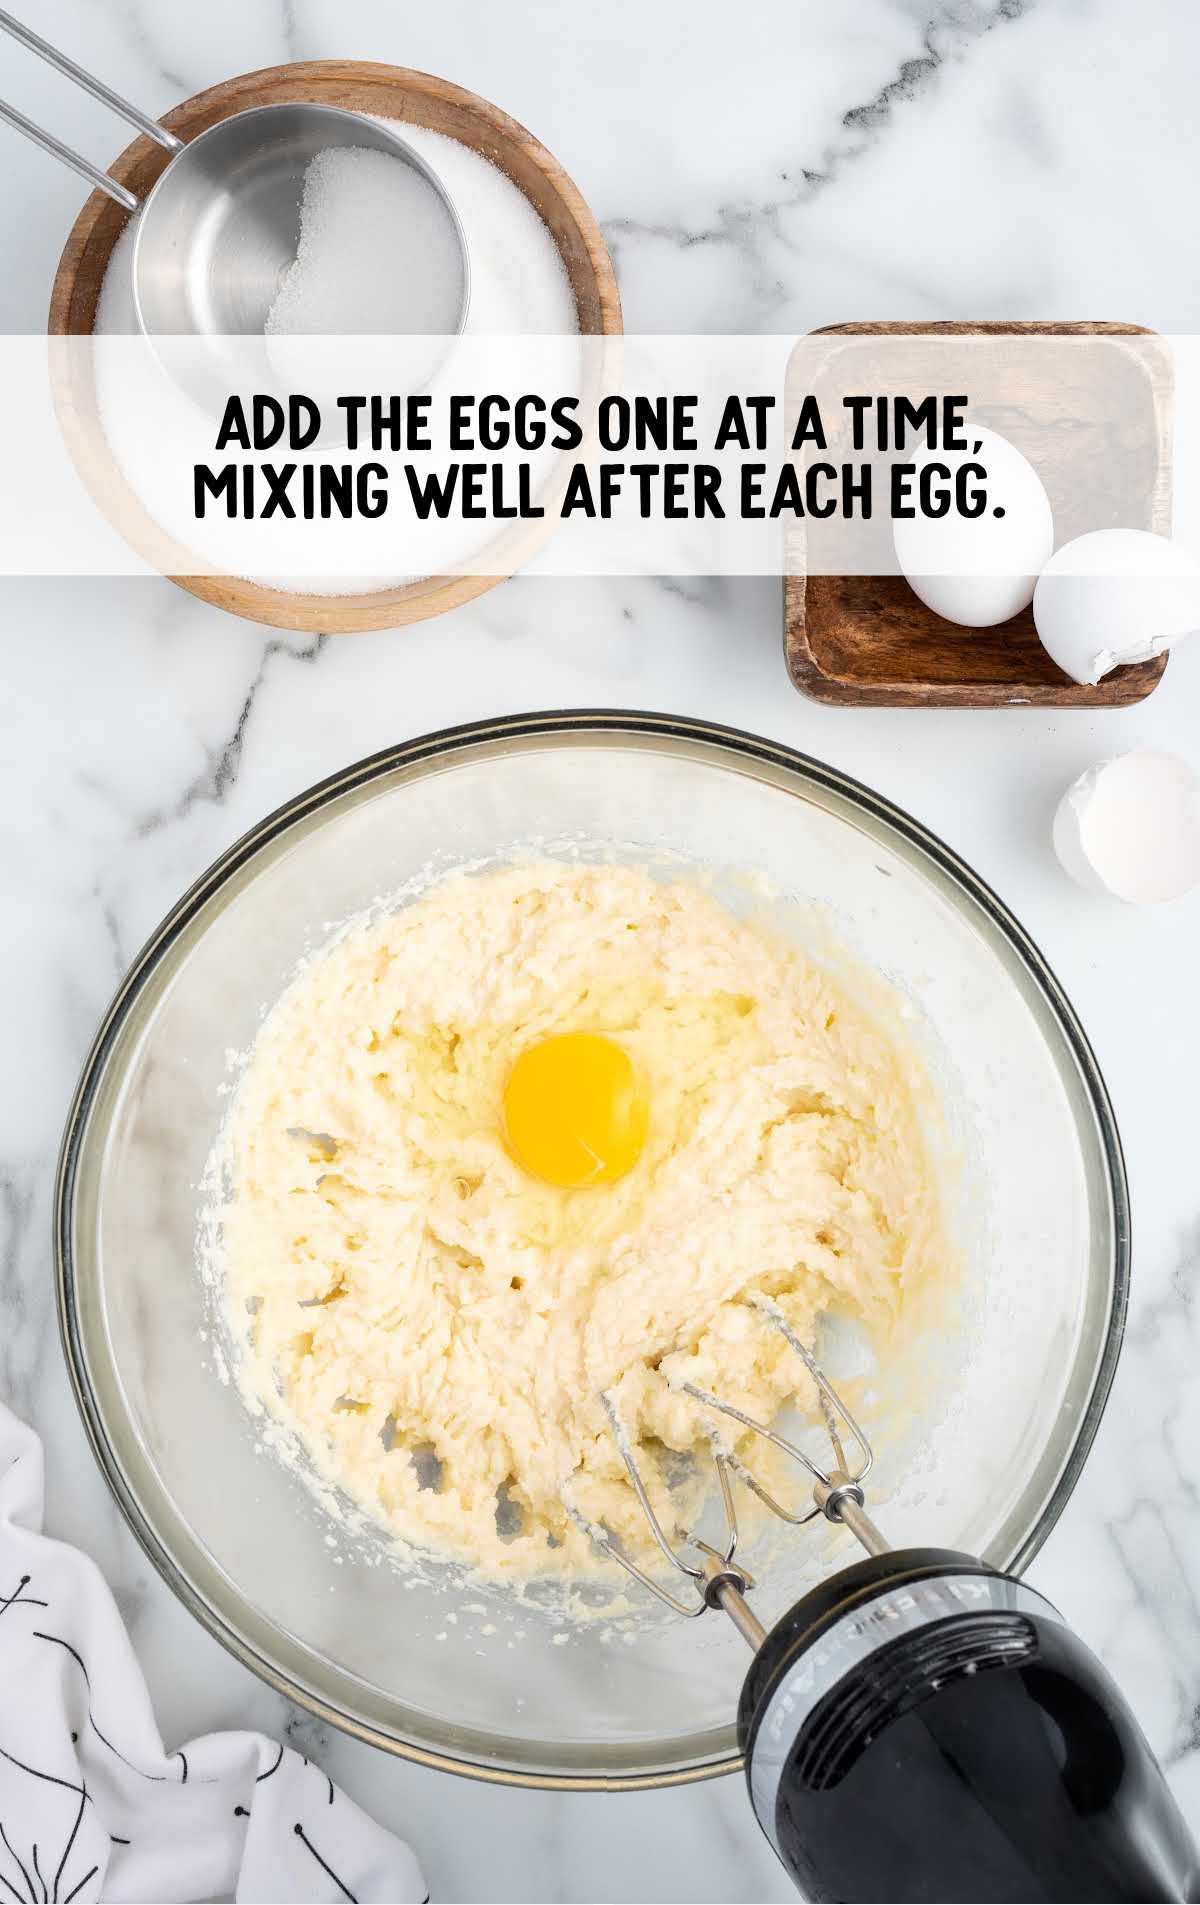 egg added to the ingredients mixture and blended together